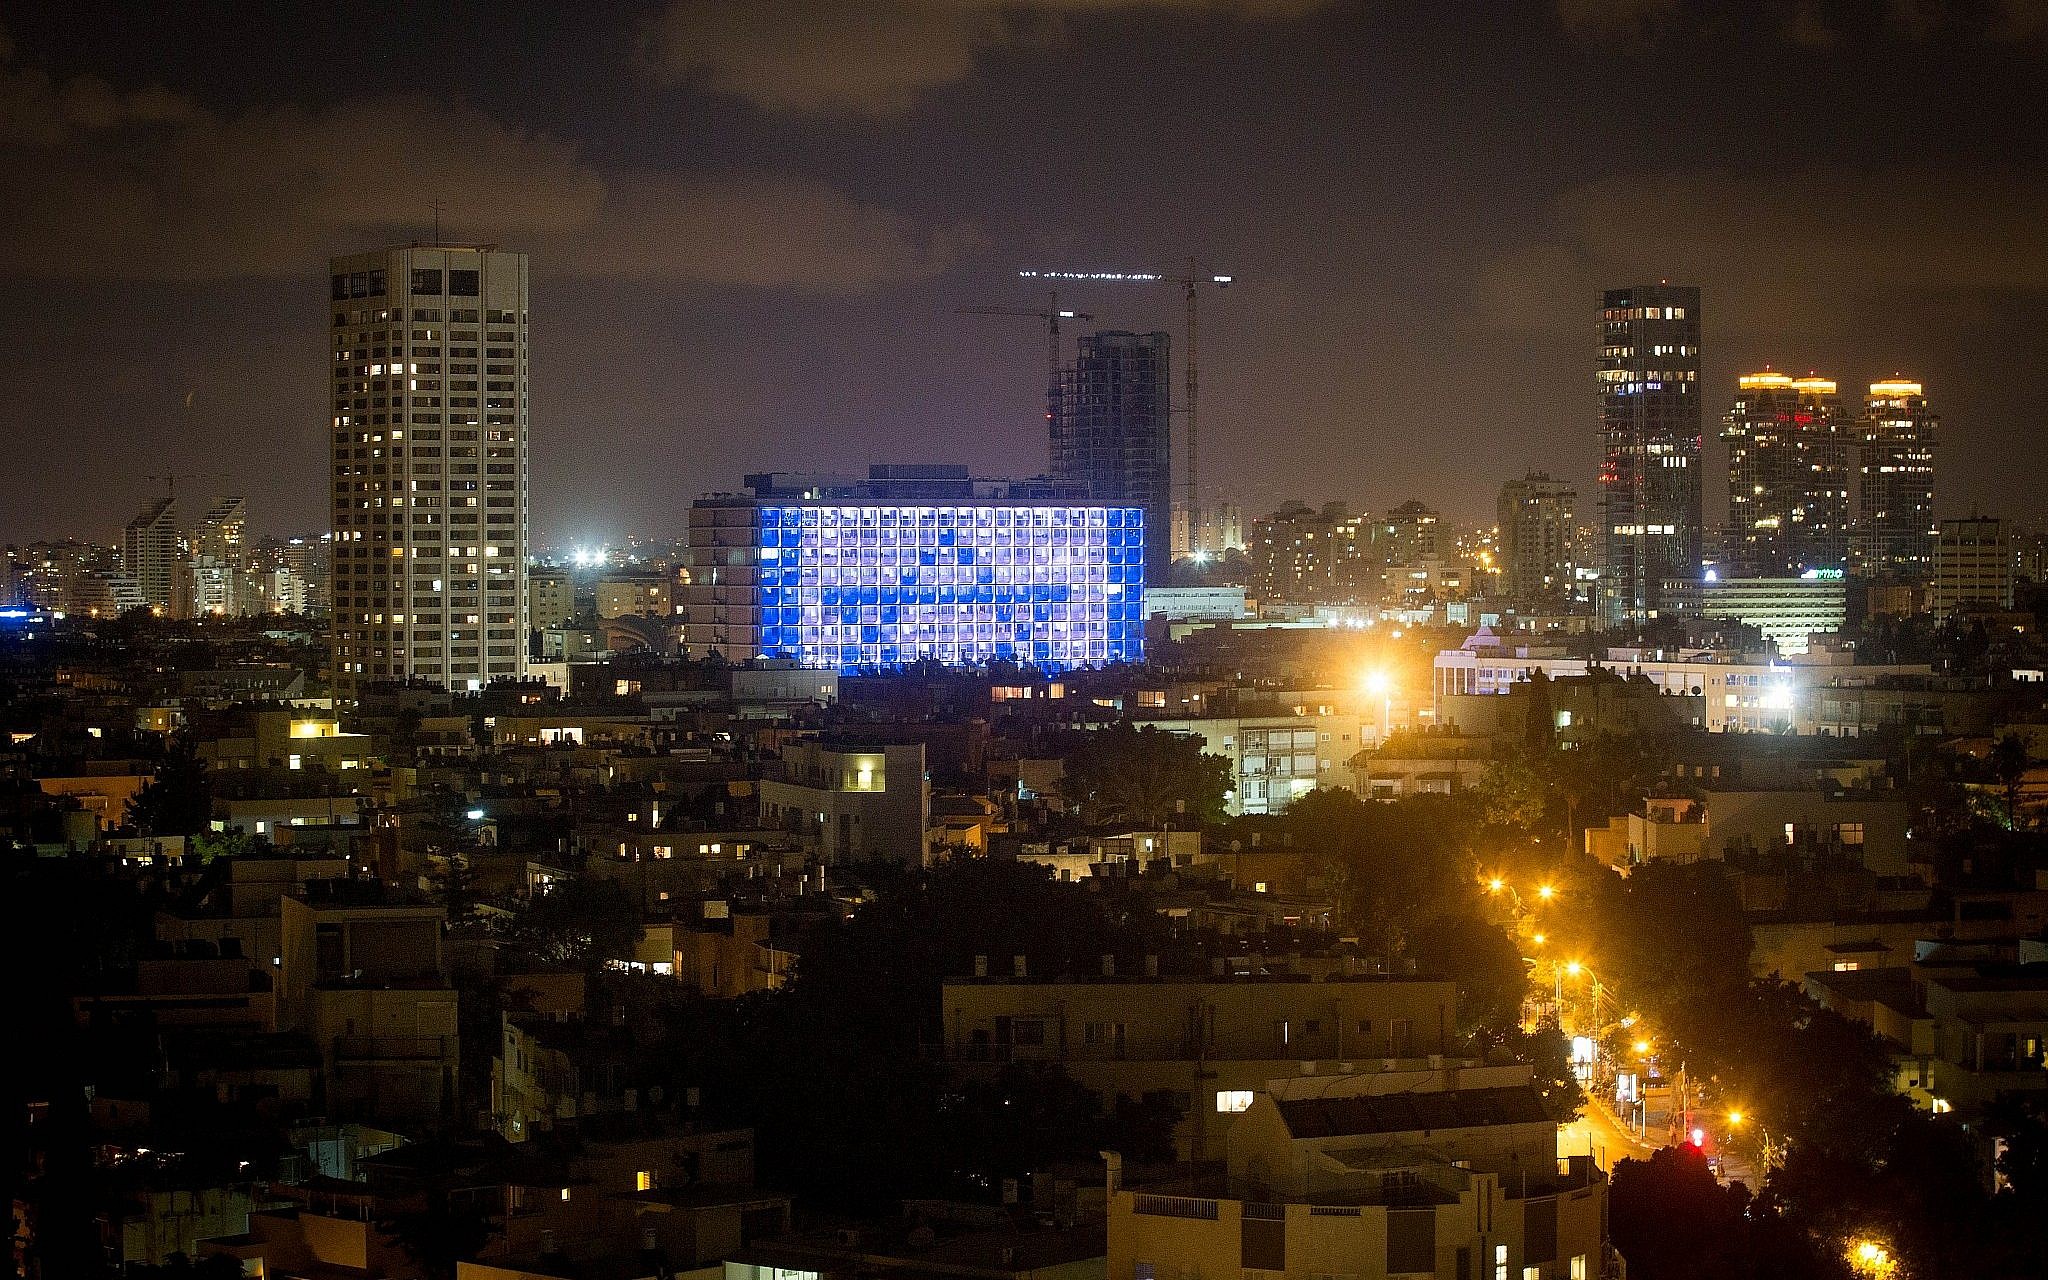 Israel’s Tel Aviv is now the most expensive city in the world to live in